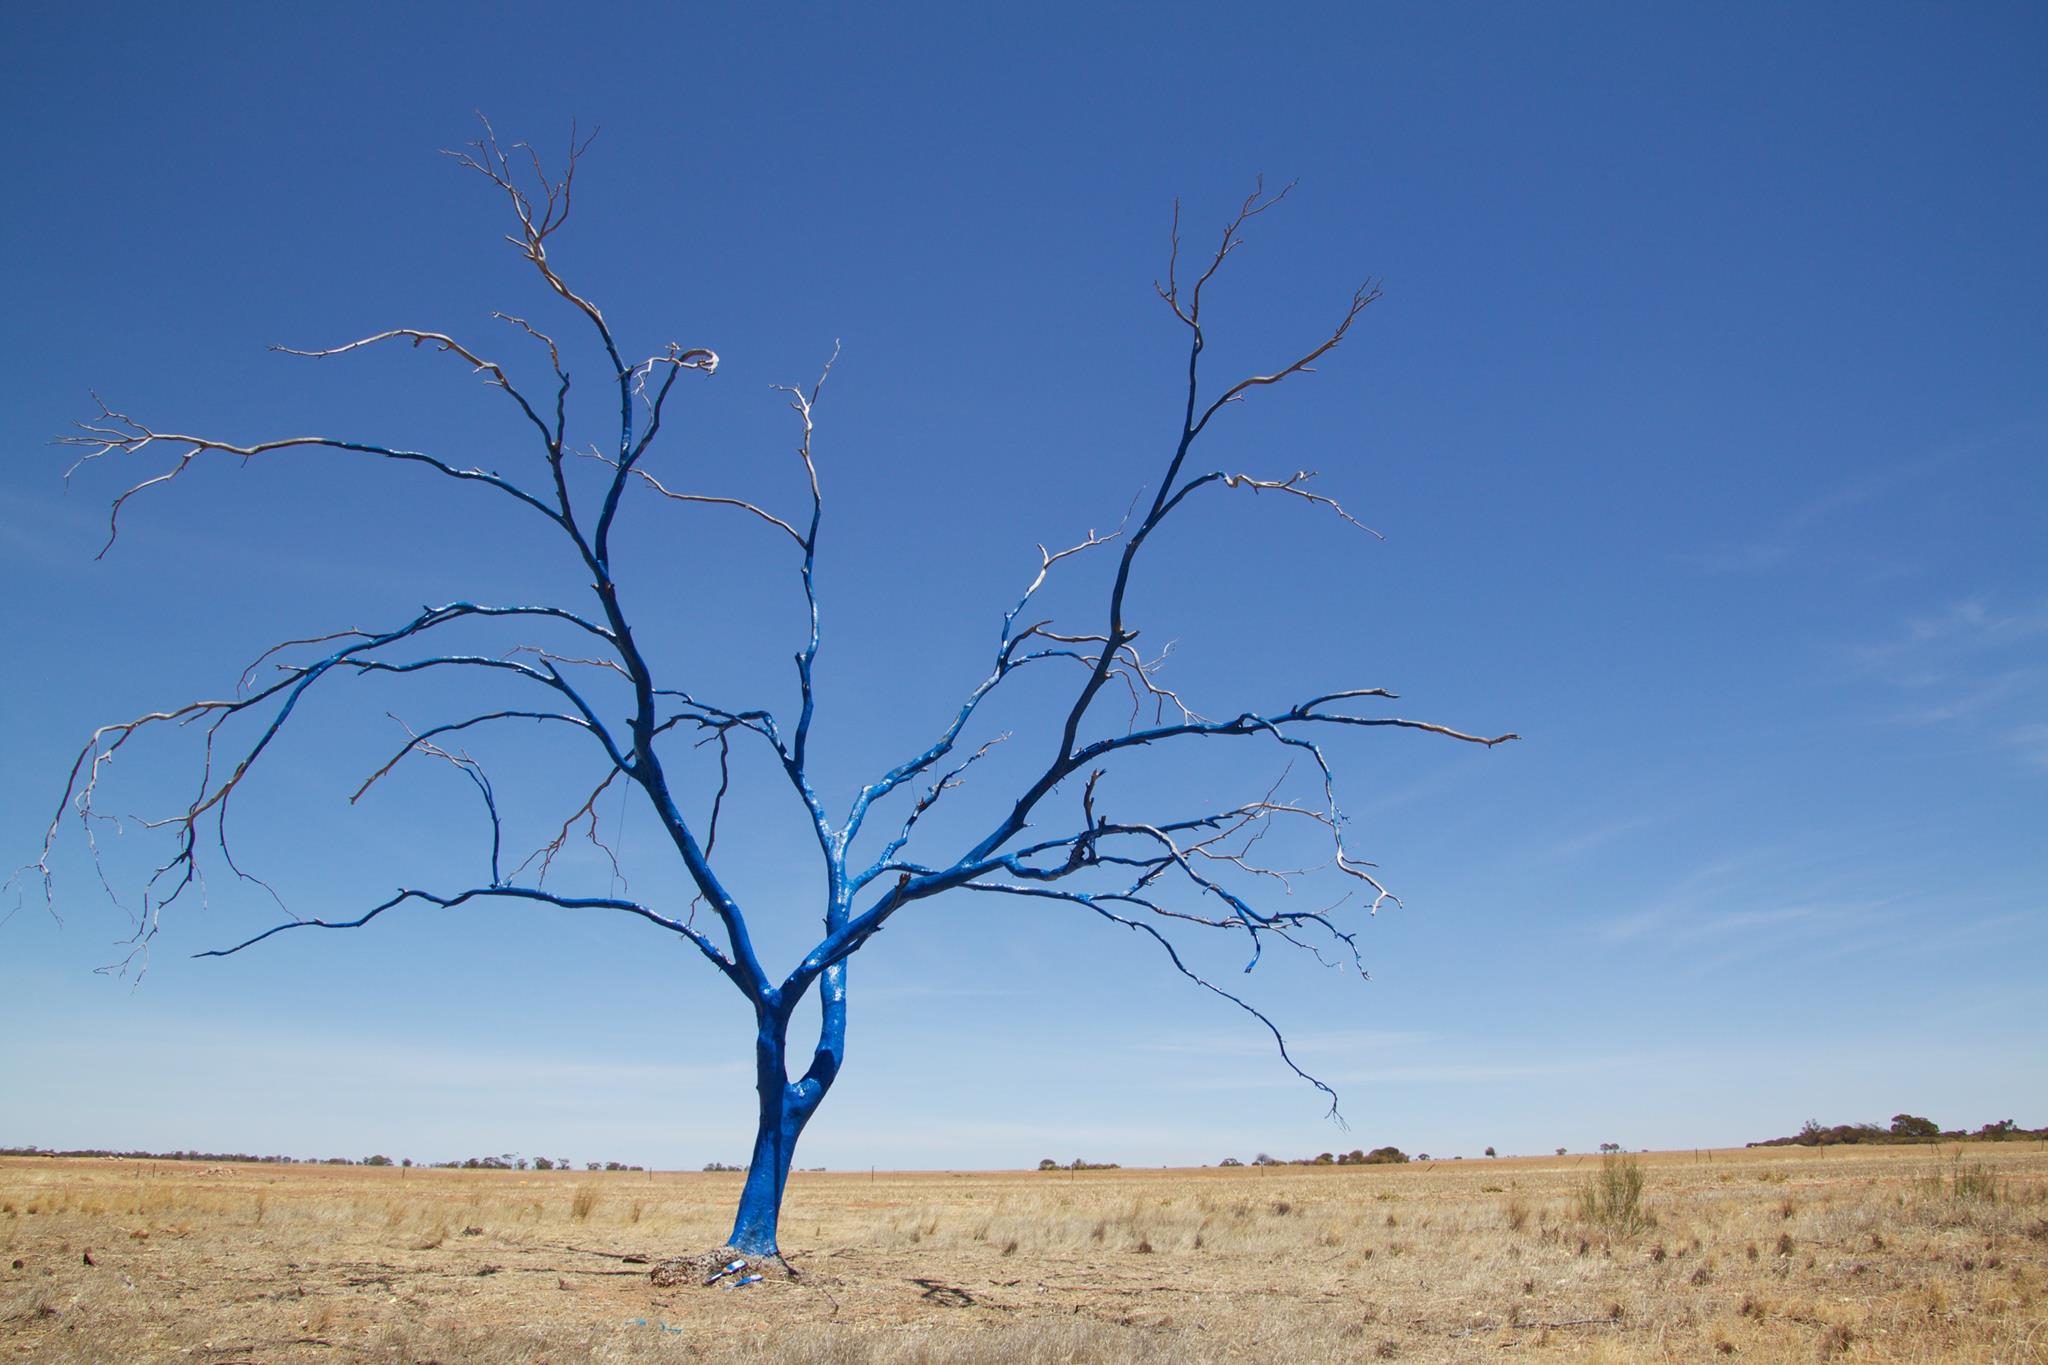 Image of a dead tree painted blue standing in barren dry paddock.